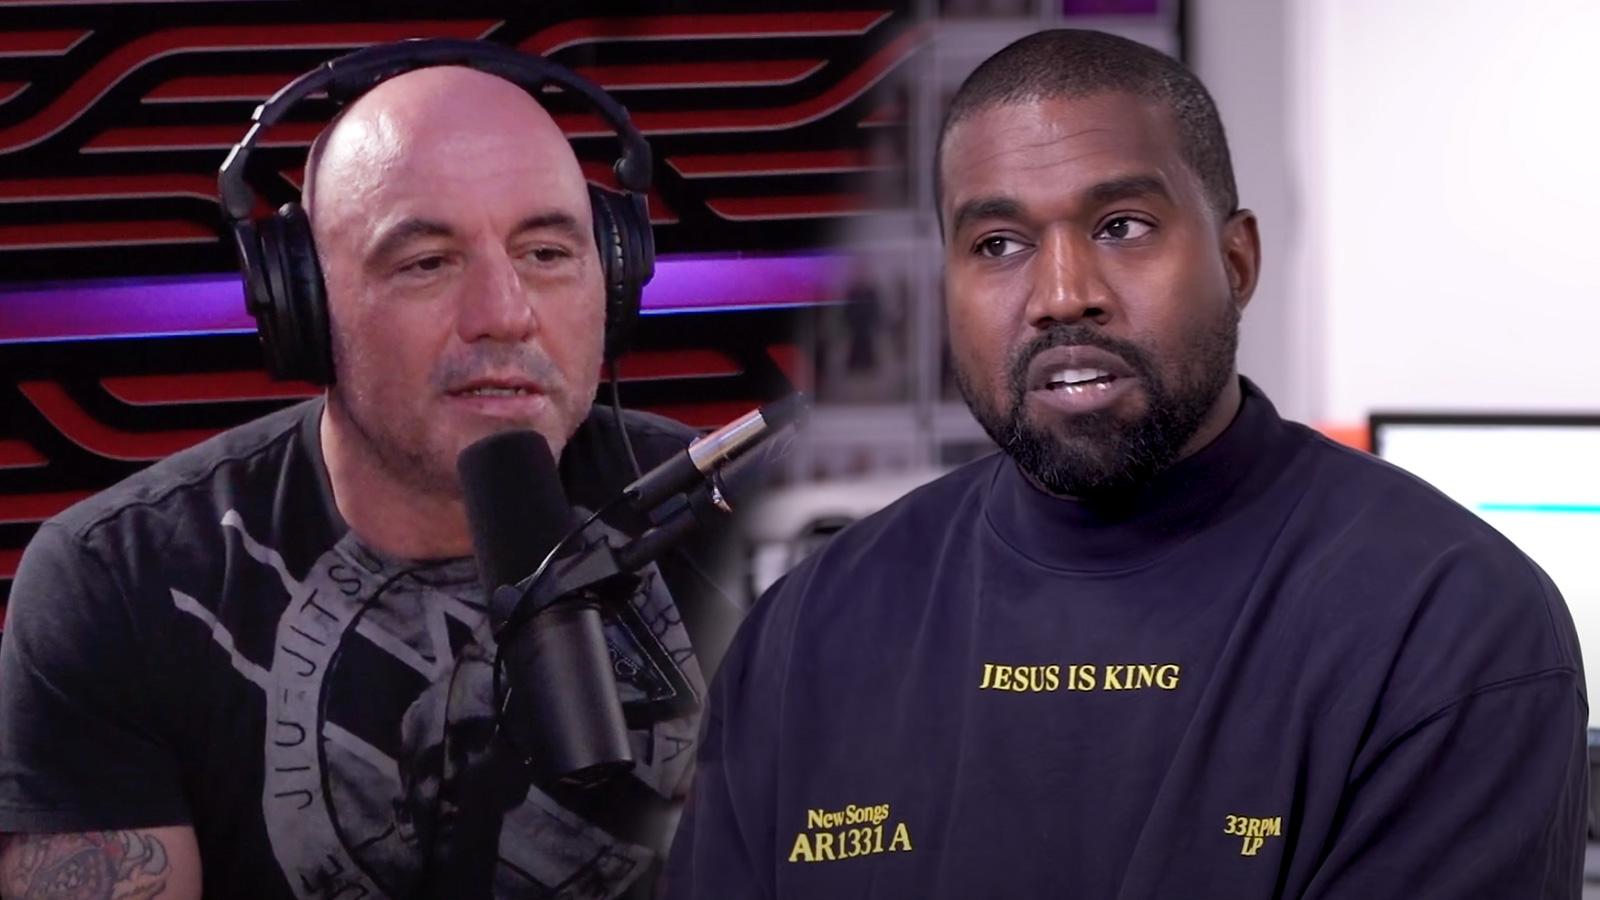 Joe Rogan is shown next to a photo of Kanye West.